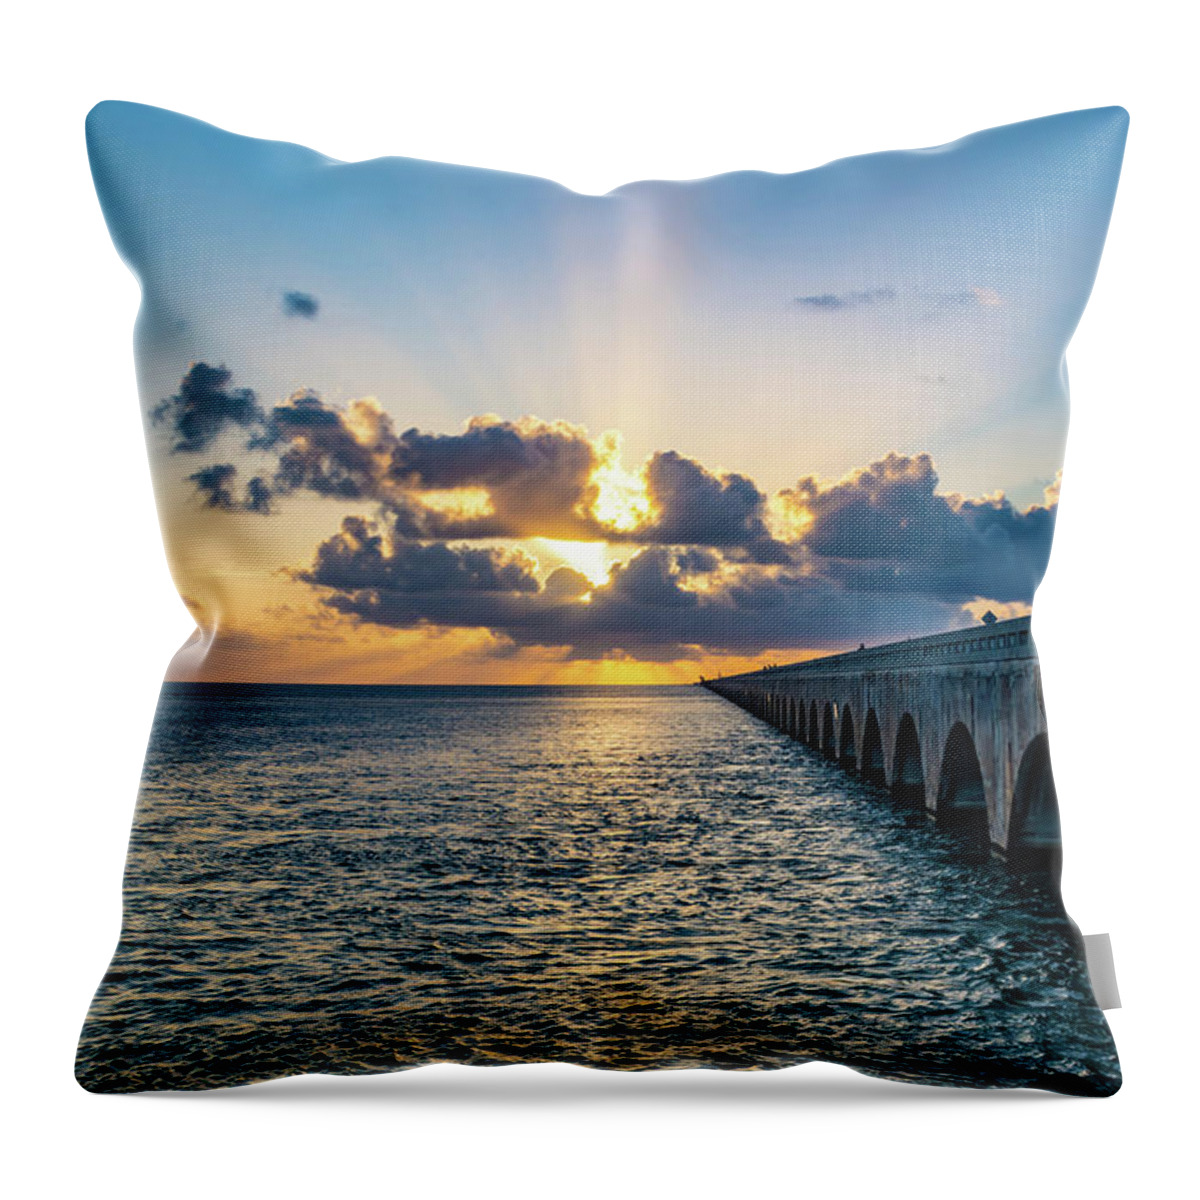 Sunrise Throw Pillow featuring the photograph Oh Those Rays by Jodi Lyn Jones